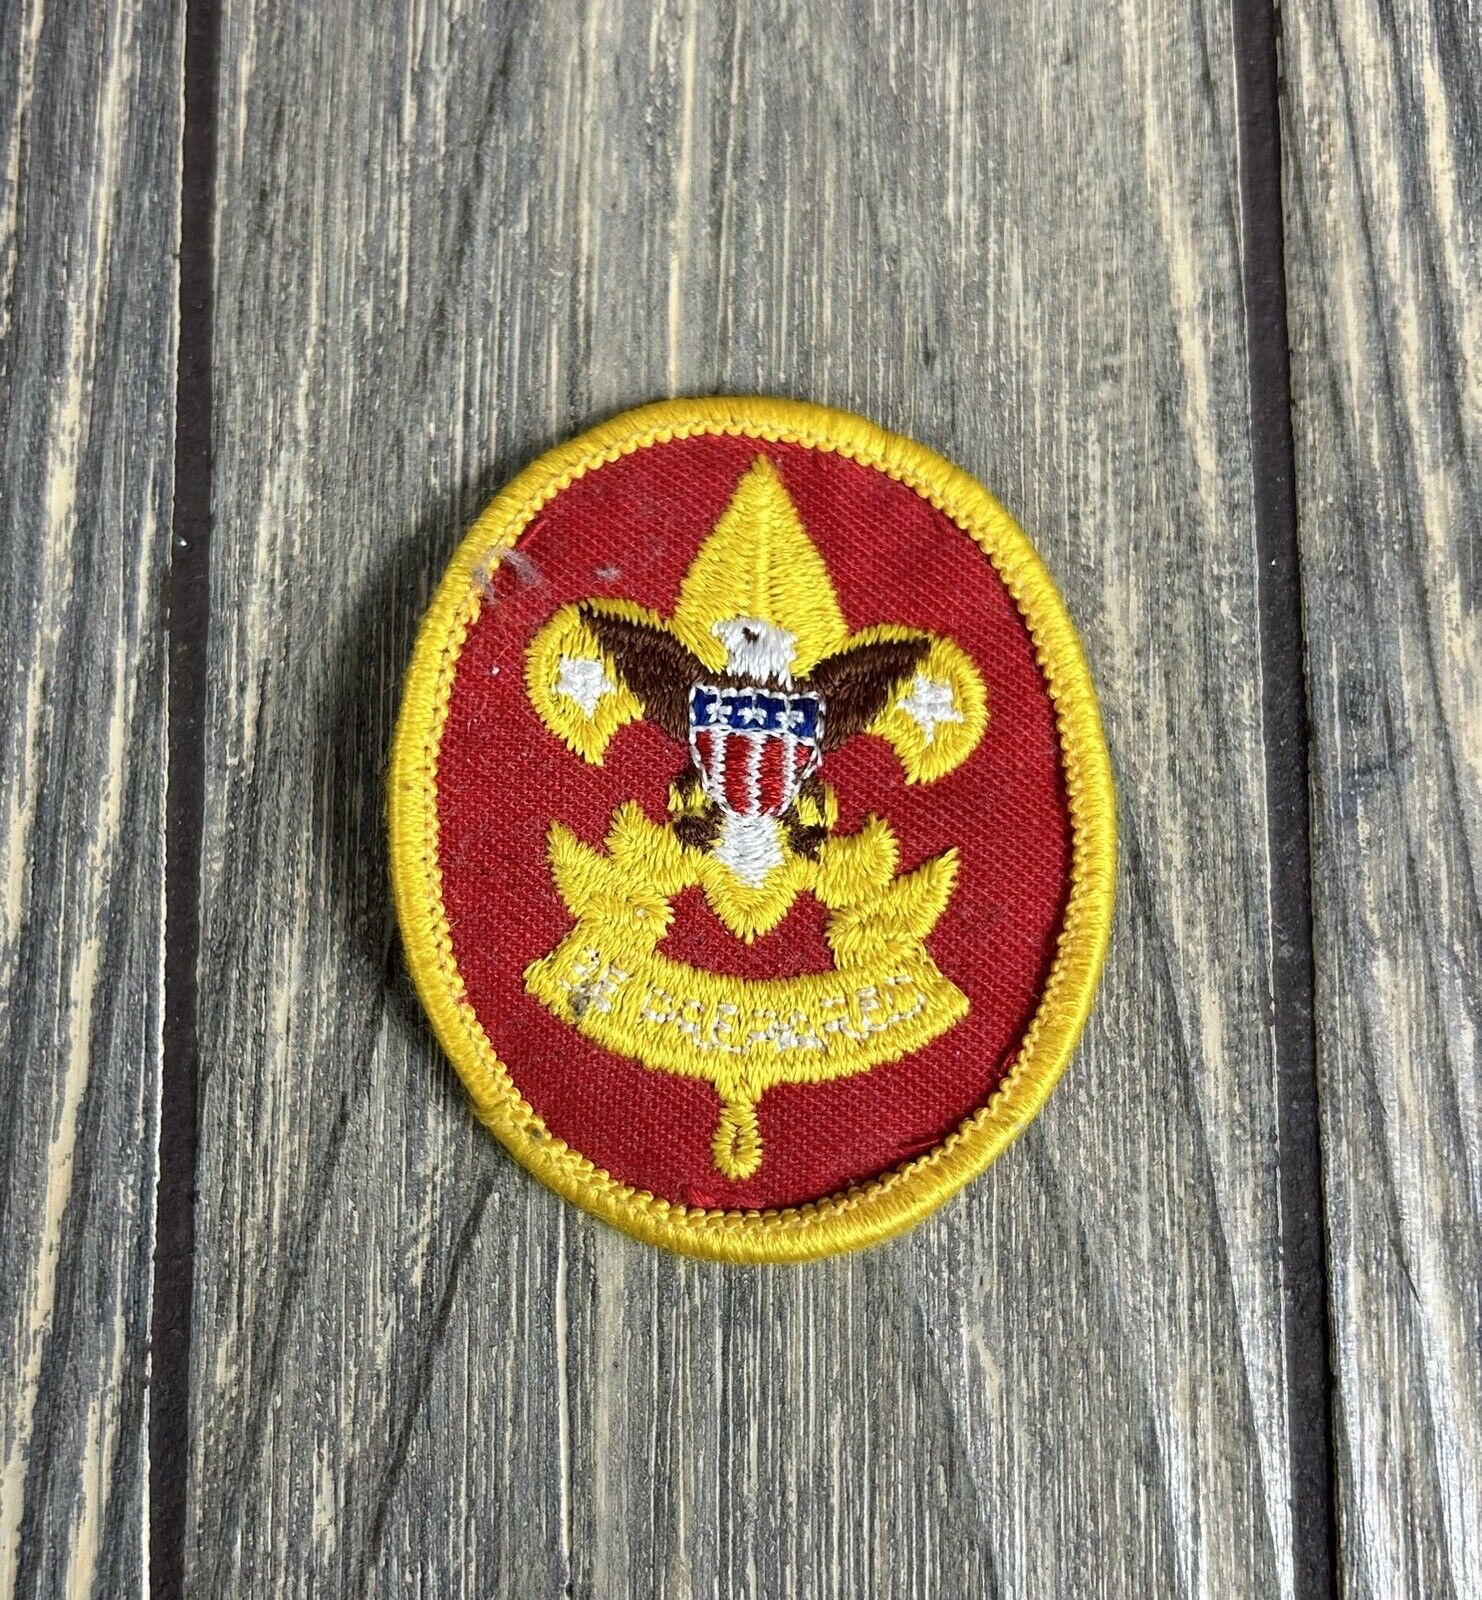 VTG Boy Scouts of America BSA First Class Patch GOLD Border RED OVAL PATCH 2.5”